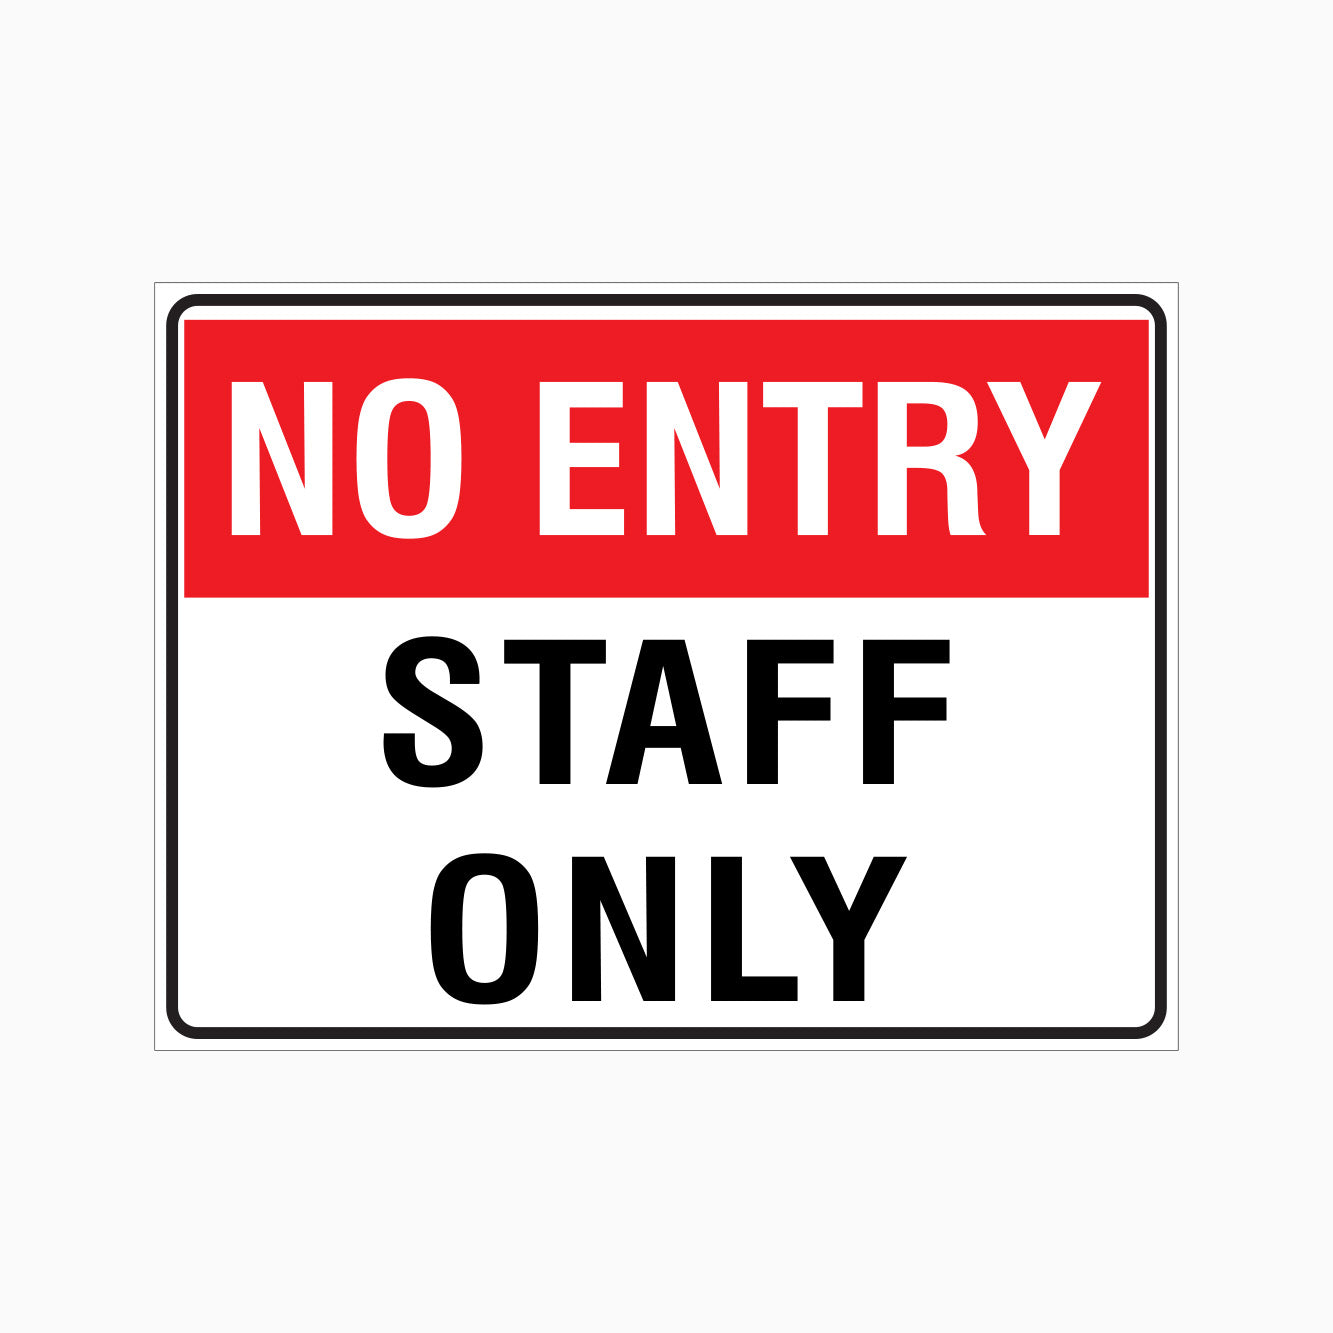 NO ENTRY STAFF ONLY SIGN - GE SIGNS